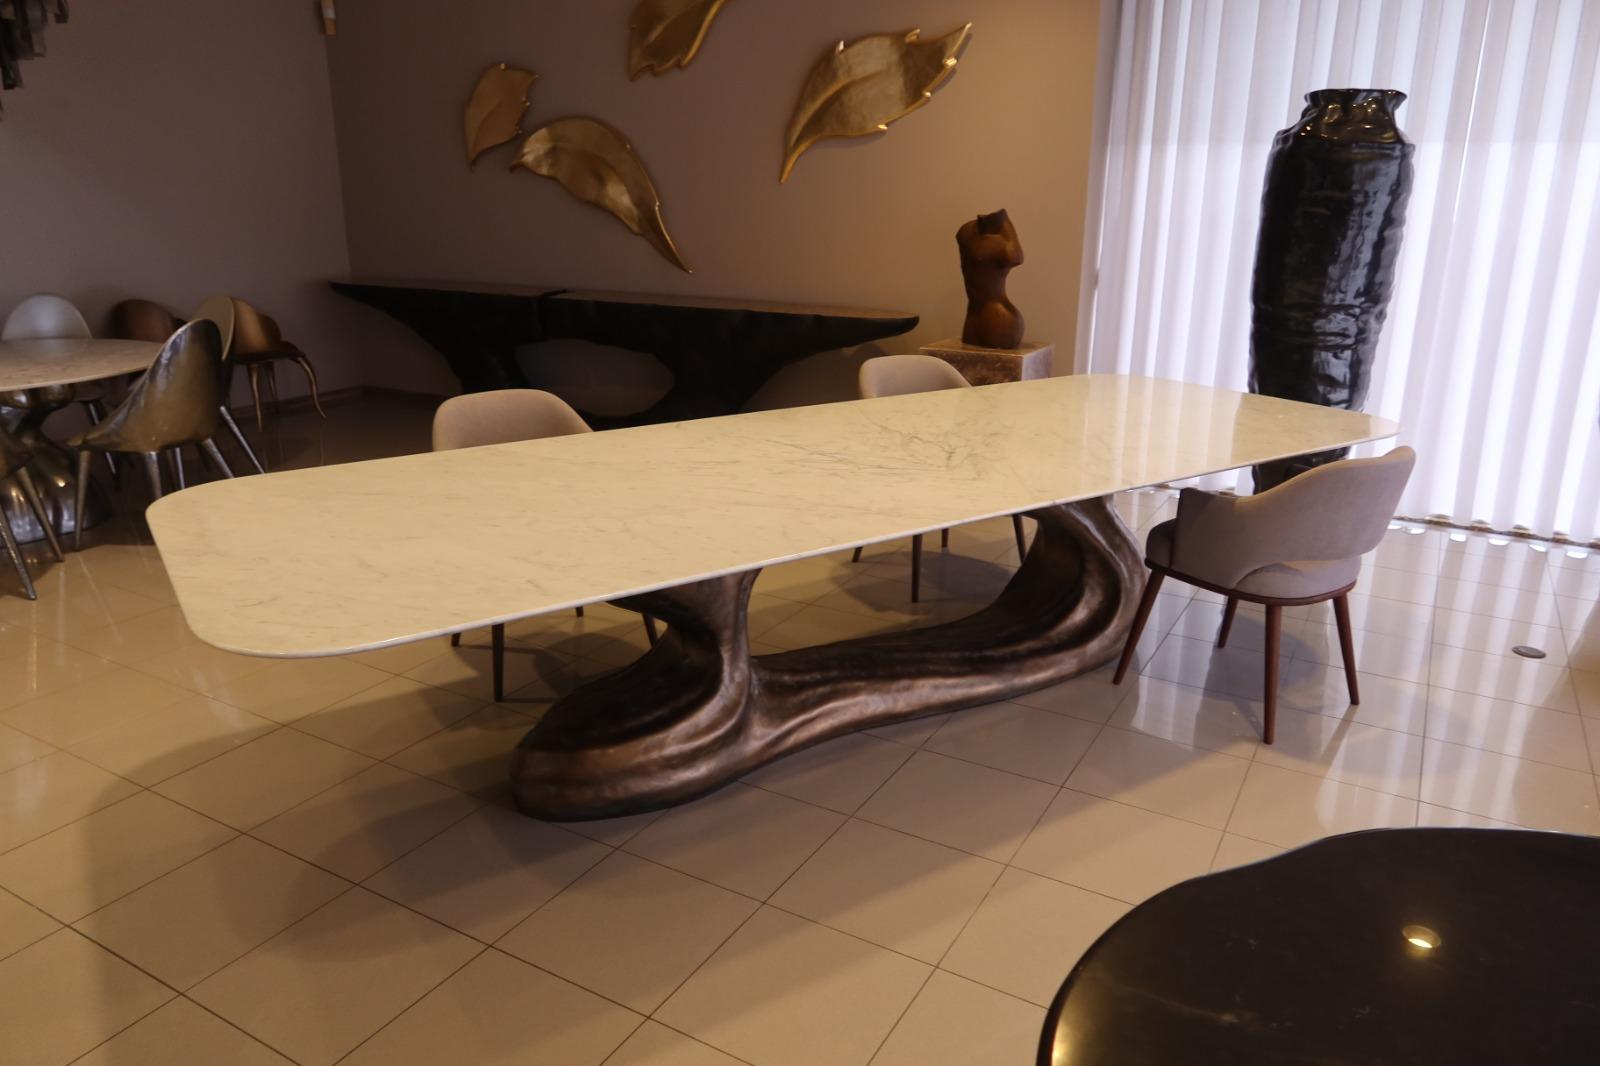 Portuguese New Design Dining Table in Arabescato Marble 10/12 Persons Ready Delivery Now For Sale